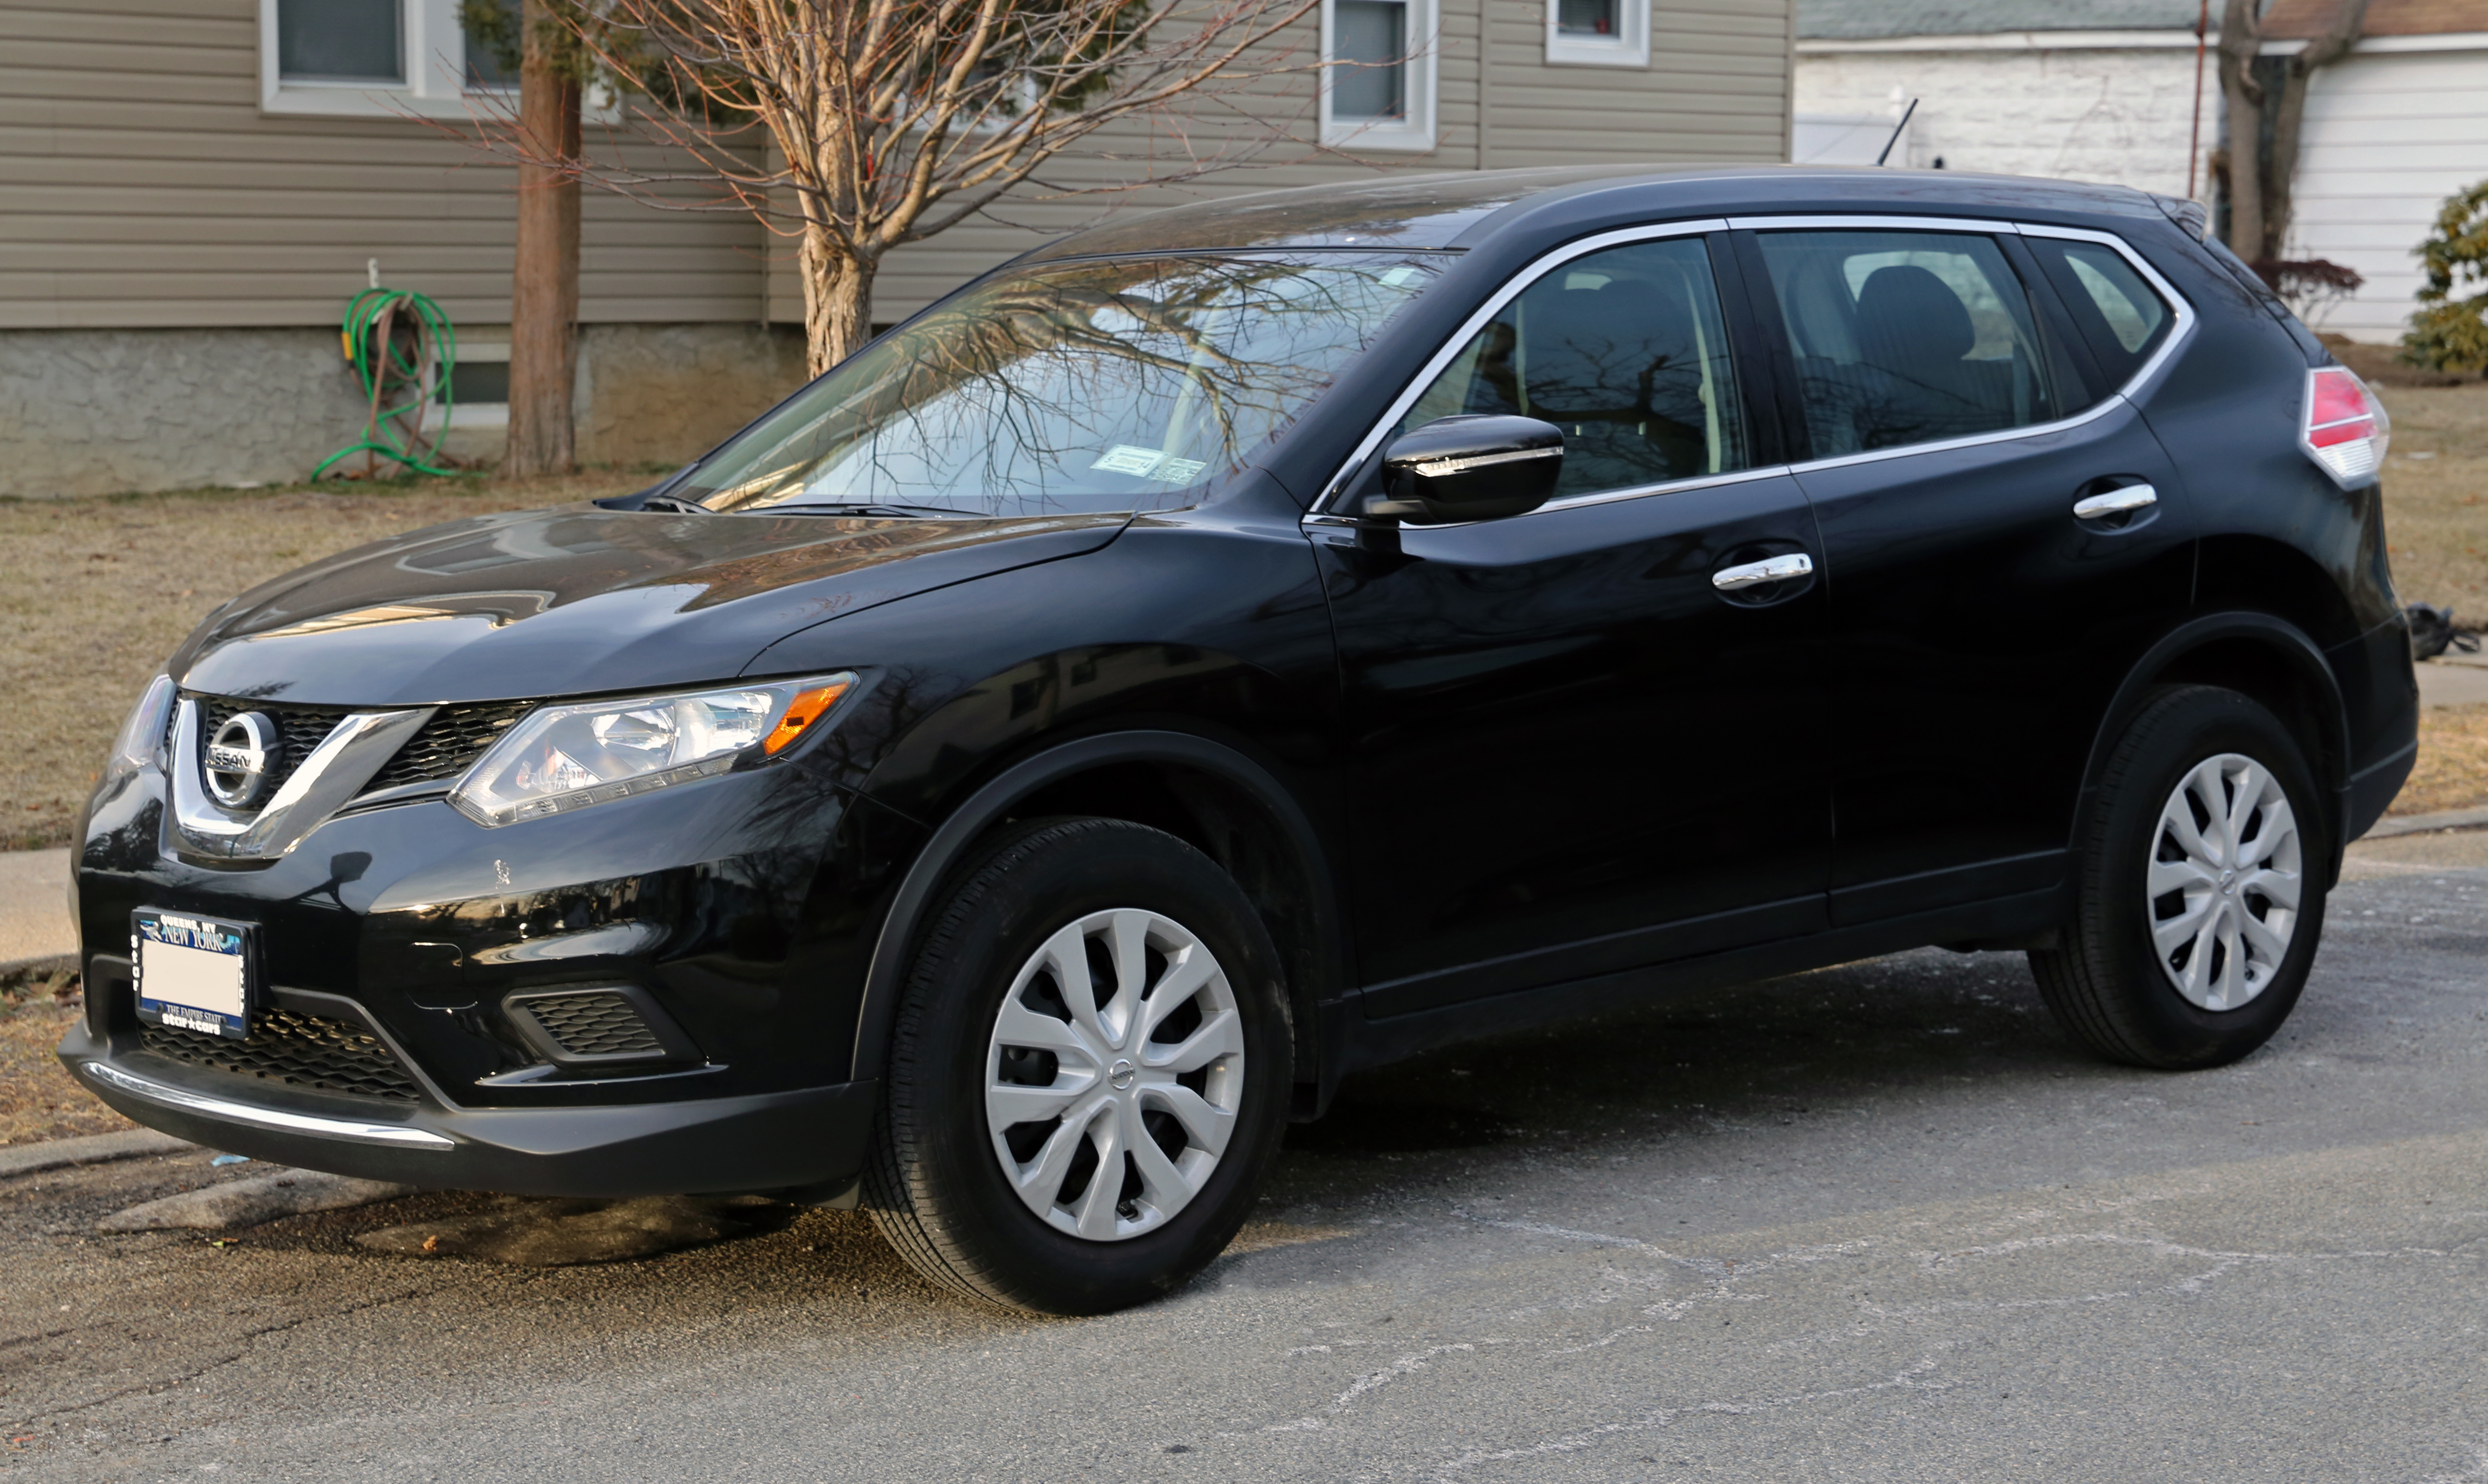 File:2014 Nissan Rogue S AWD front left.jpg - Wikimedia Commons